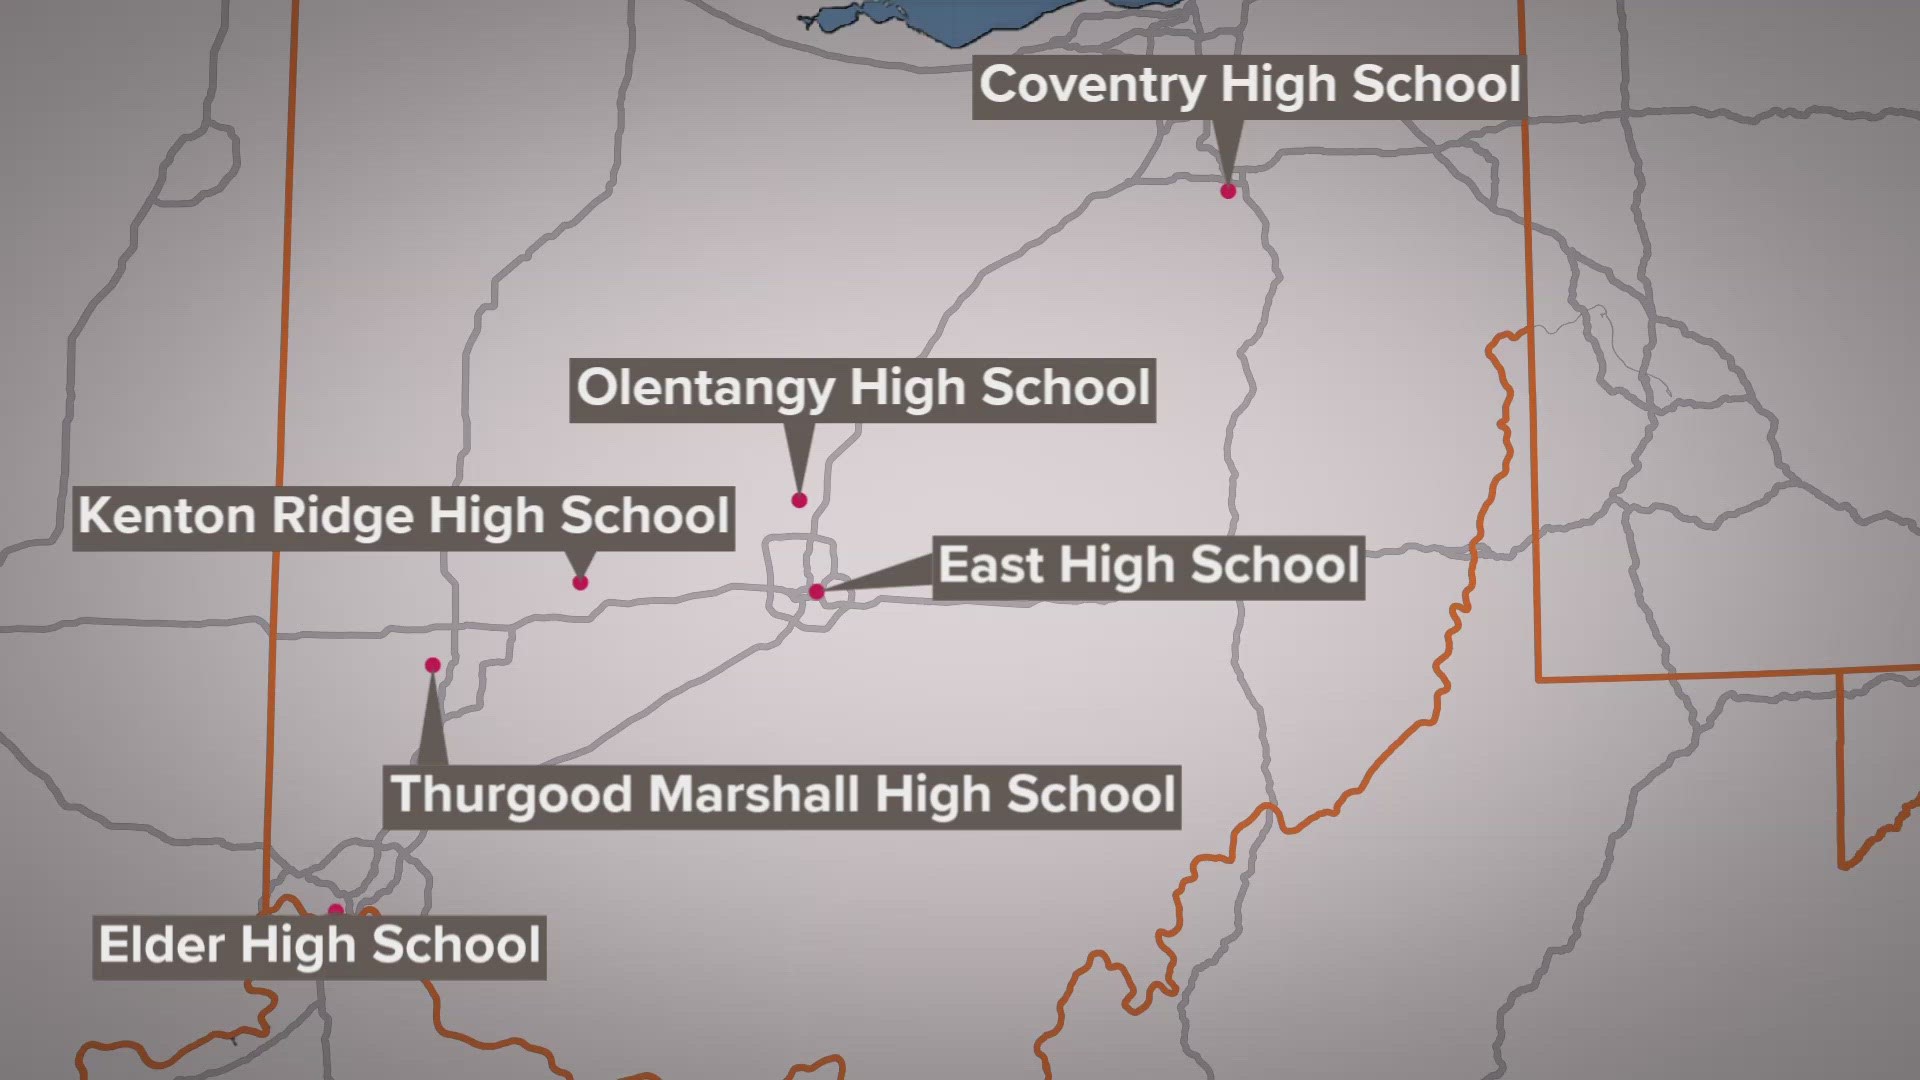 Law enforcement responded to several Ohio high schools on Tuesday on reports of an active shooter that were later determined to be hoaxes.